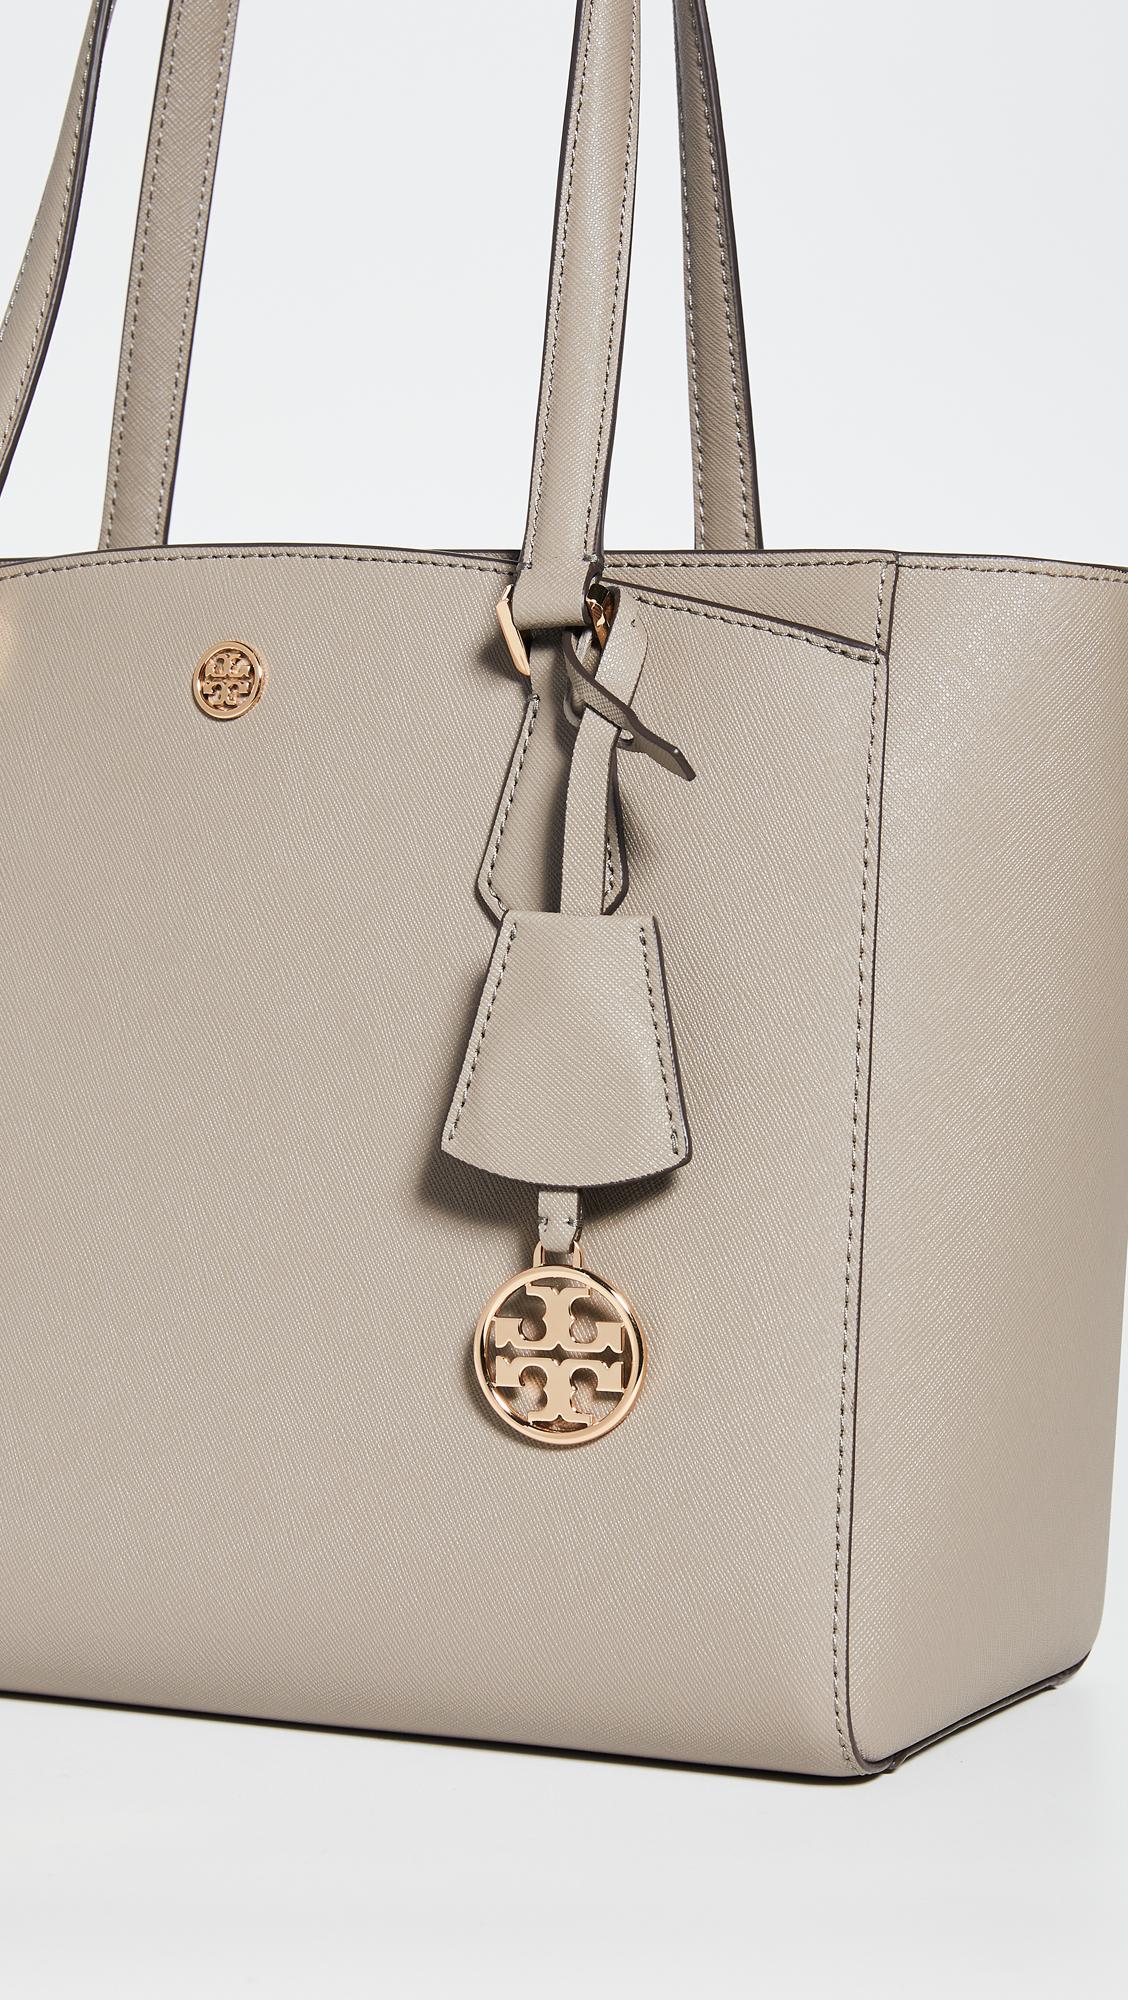 Tory Burch Robinson Small Tote Bag in French Gray